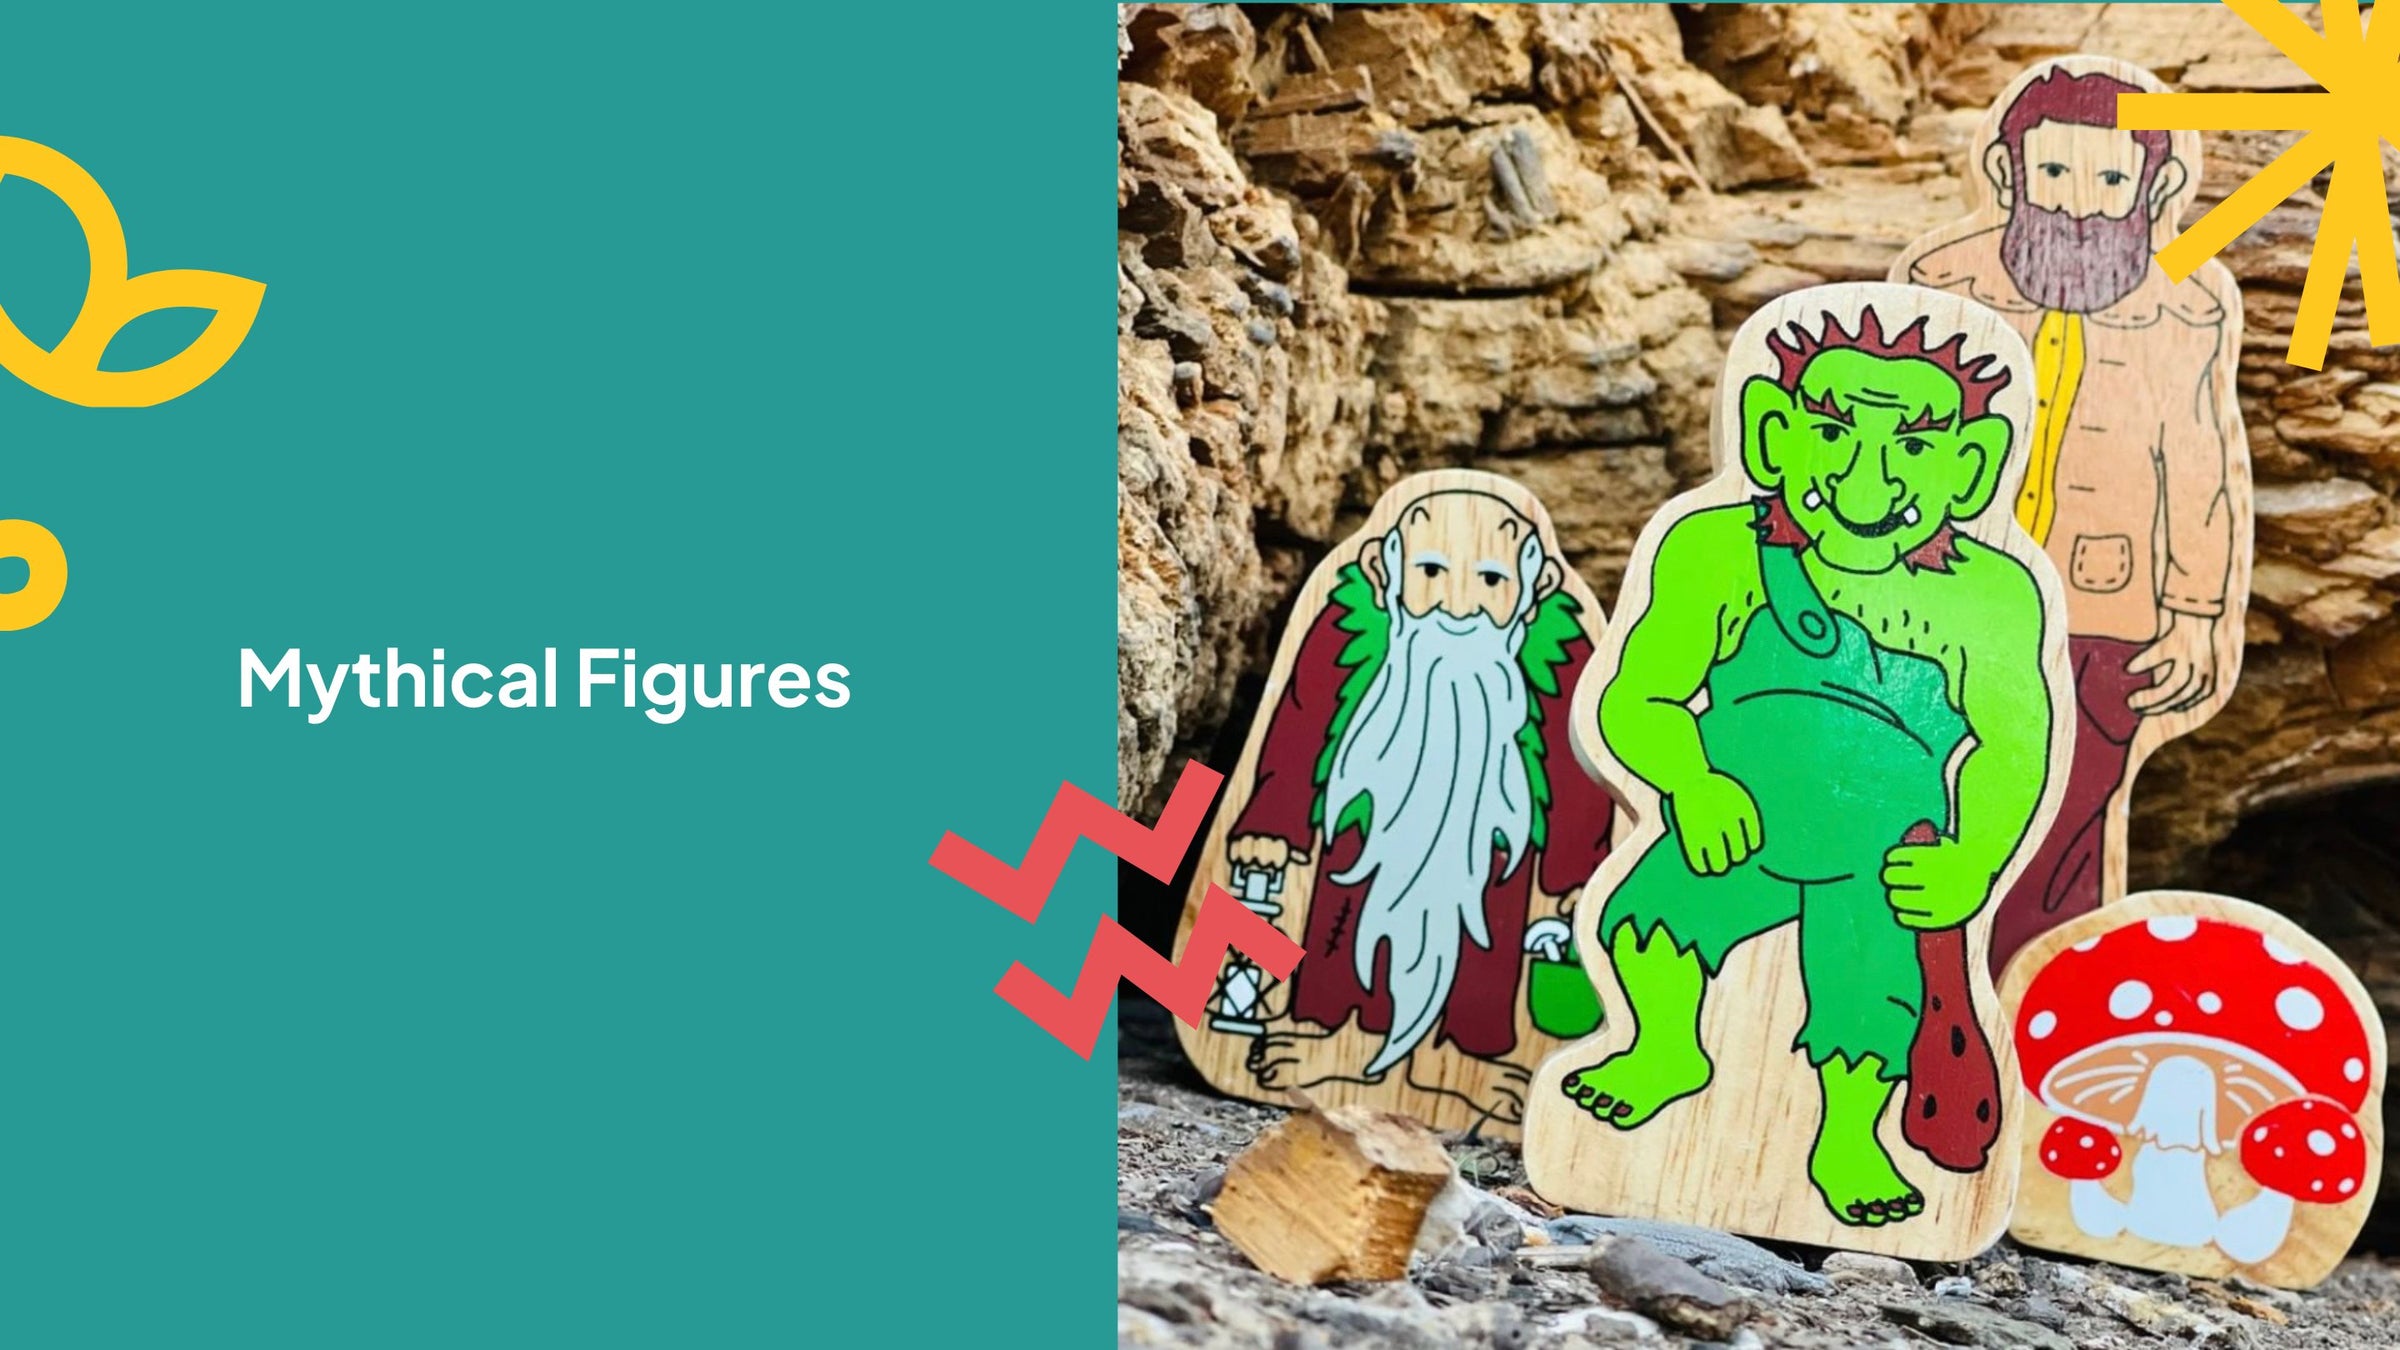 mythical character wooden figures by lanka kade including a troll, hermit, giant and toadstool